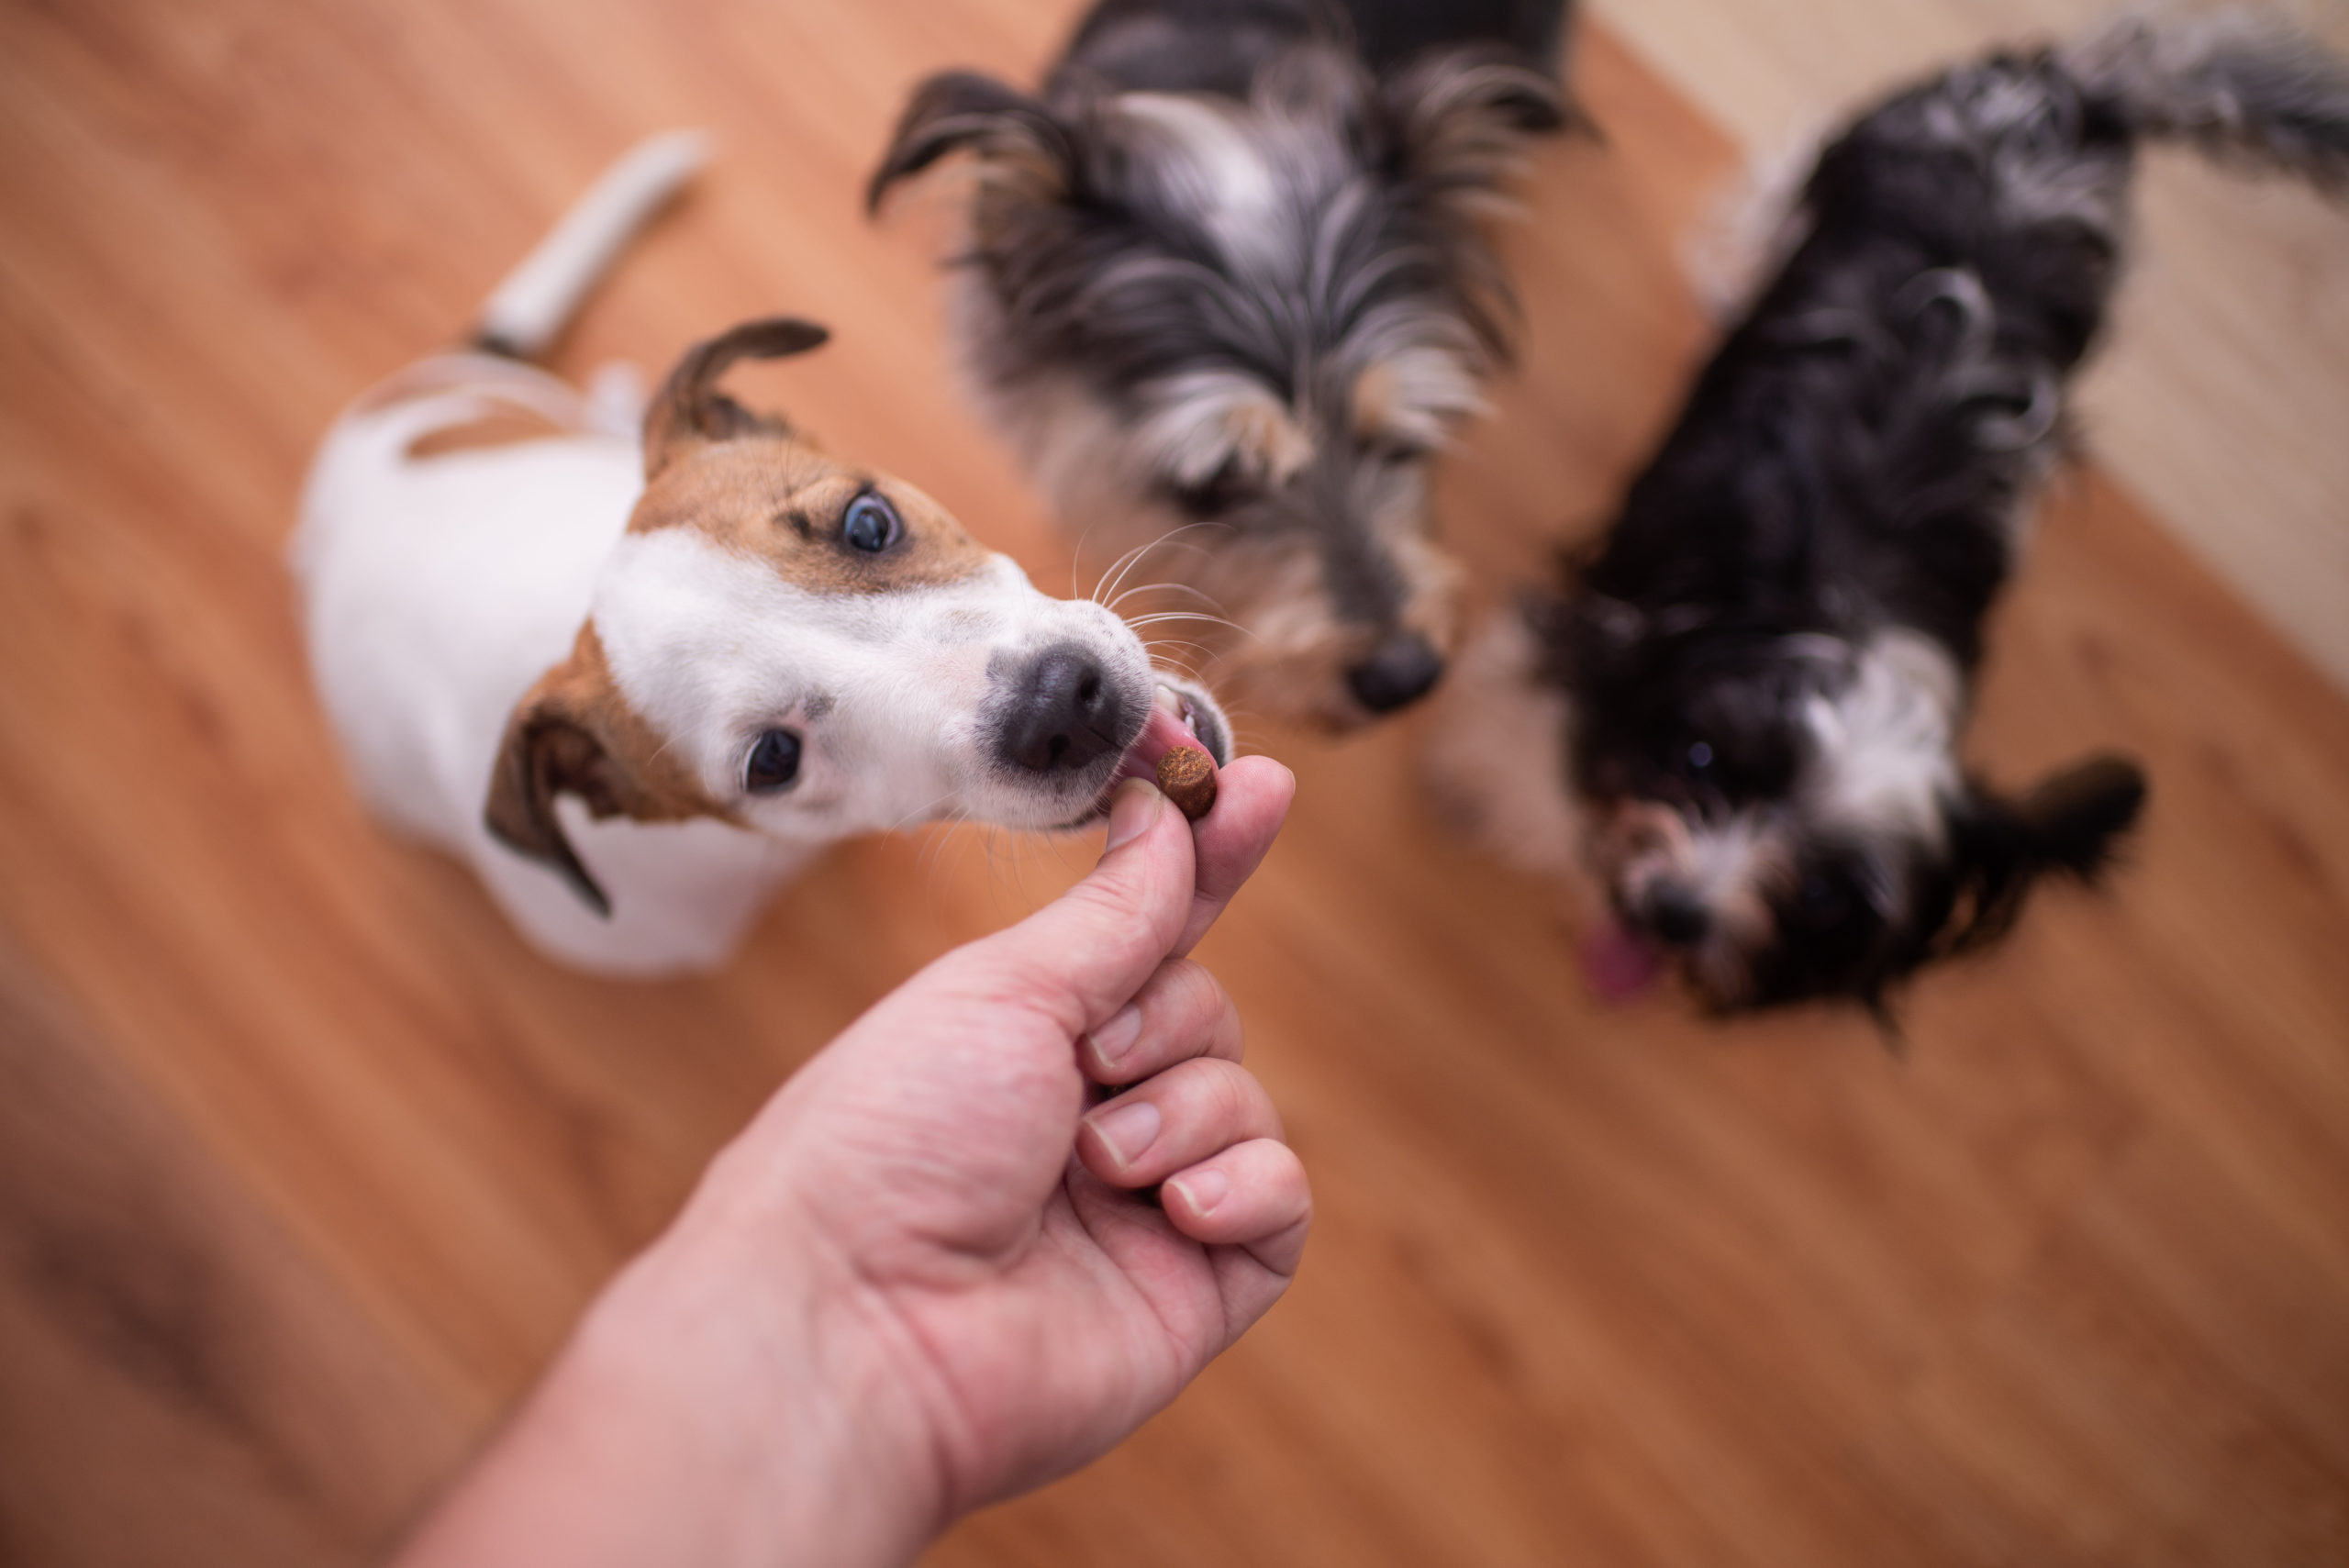 Where Should Your Dog’s Calories Come From?